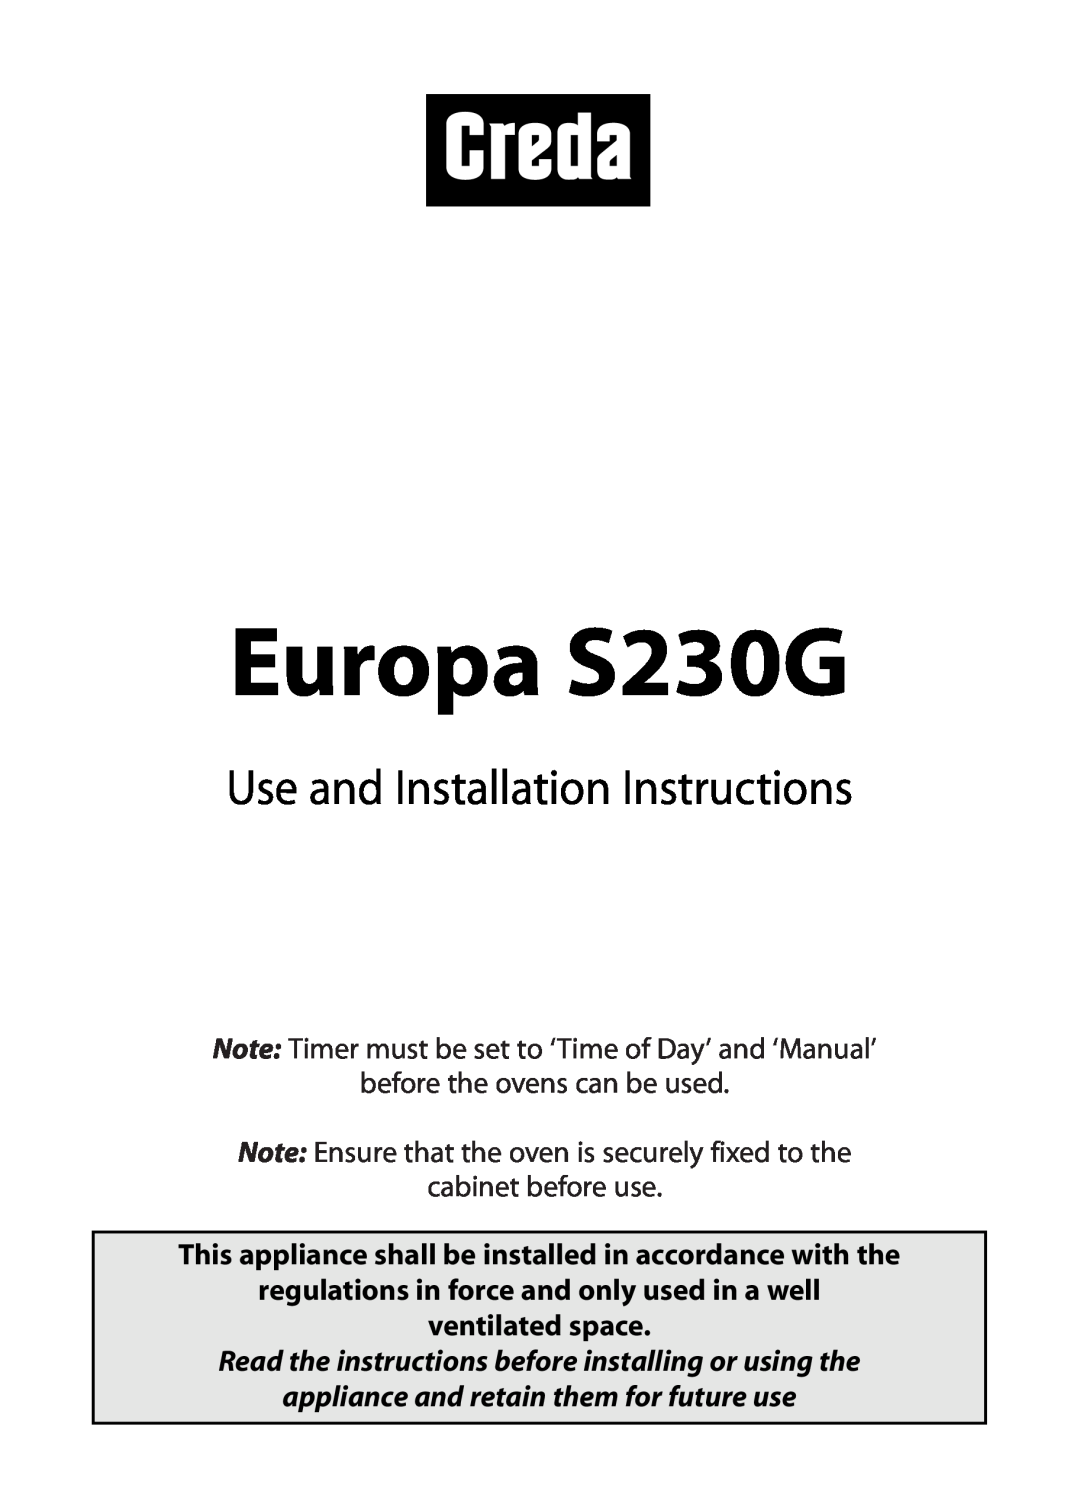 Creda installation instructions Europa S230G, Use and Installation Instructions, before the ovens can be used 